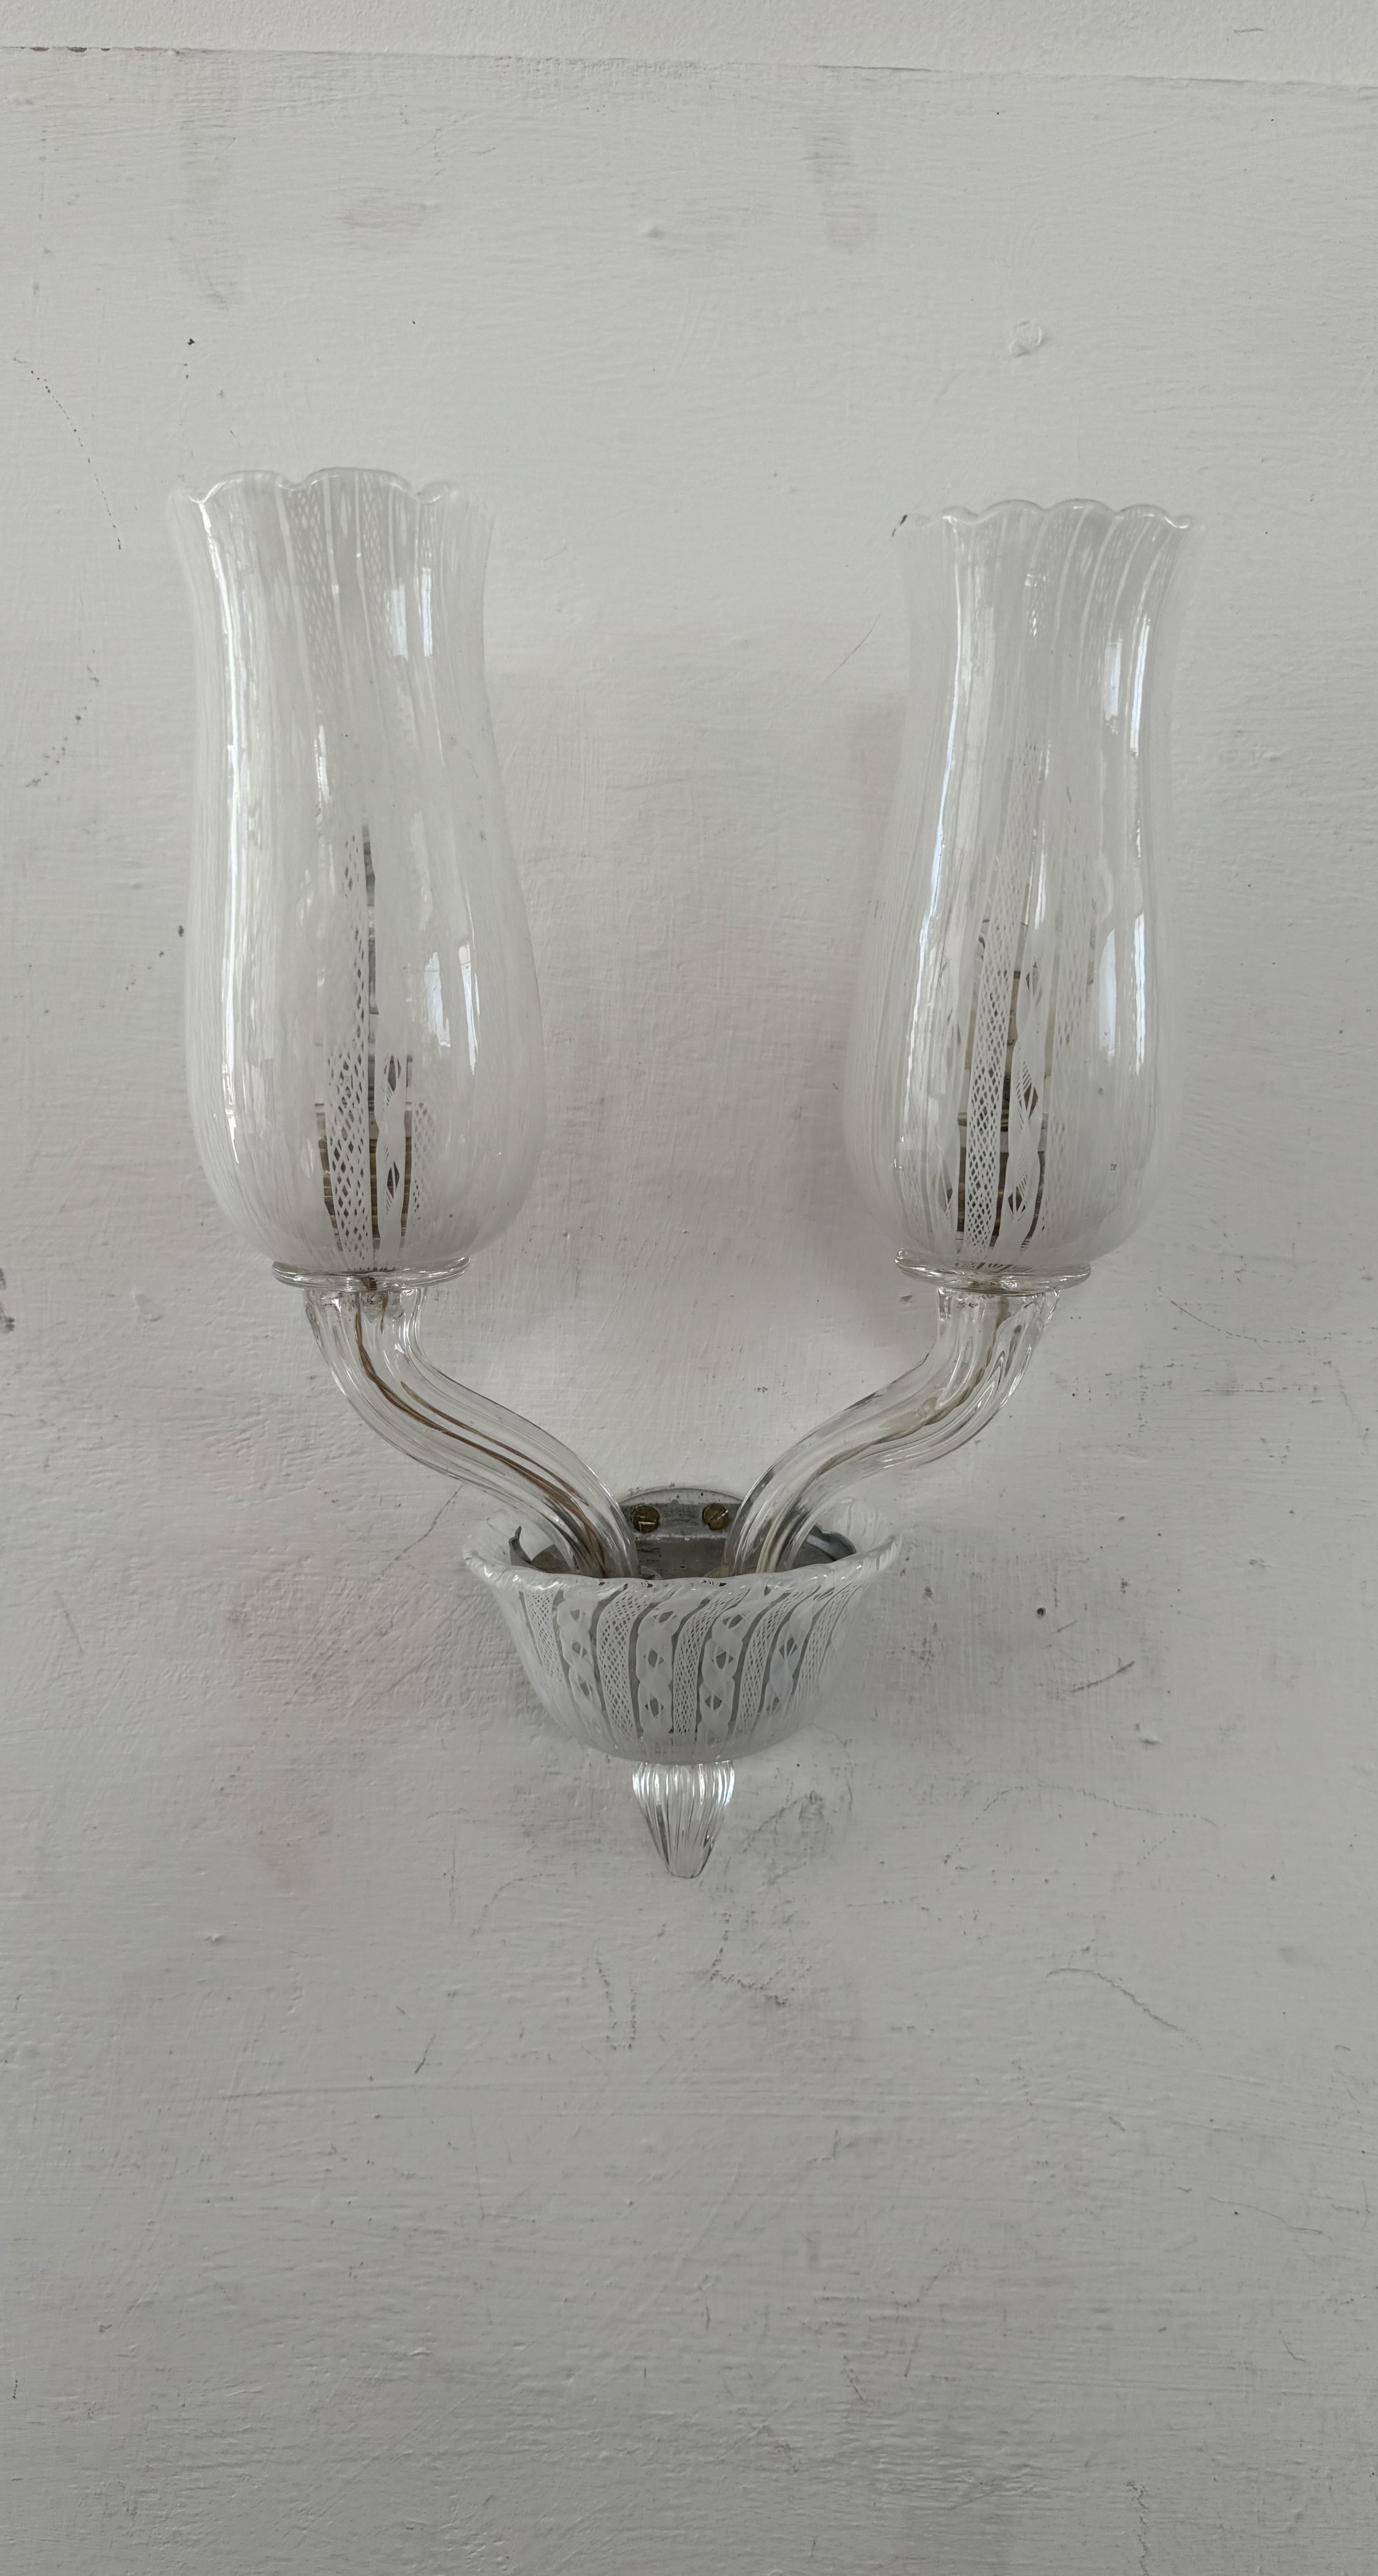 Art Deco sconce in clear and white Murano Glass, manufactured in the Zanfirico Technique in the island of Murano, Italy, circa 1930-40.
Zanfirico glass consists of fine filigree canes which have been stretched and twisted to form ribbons and